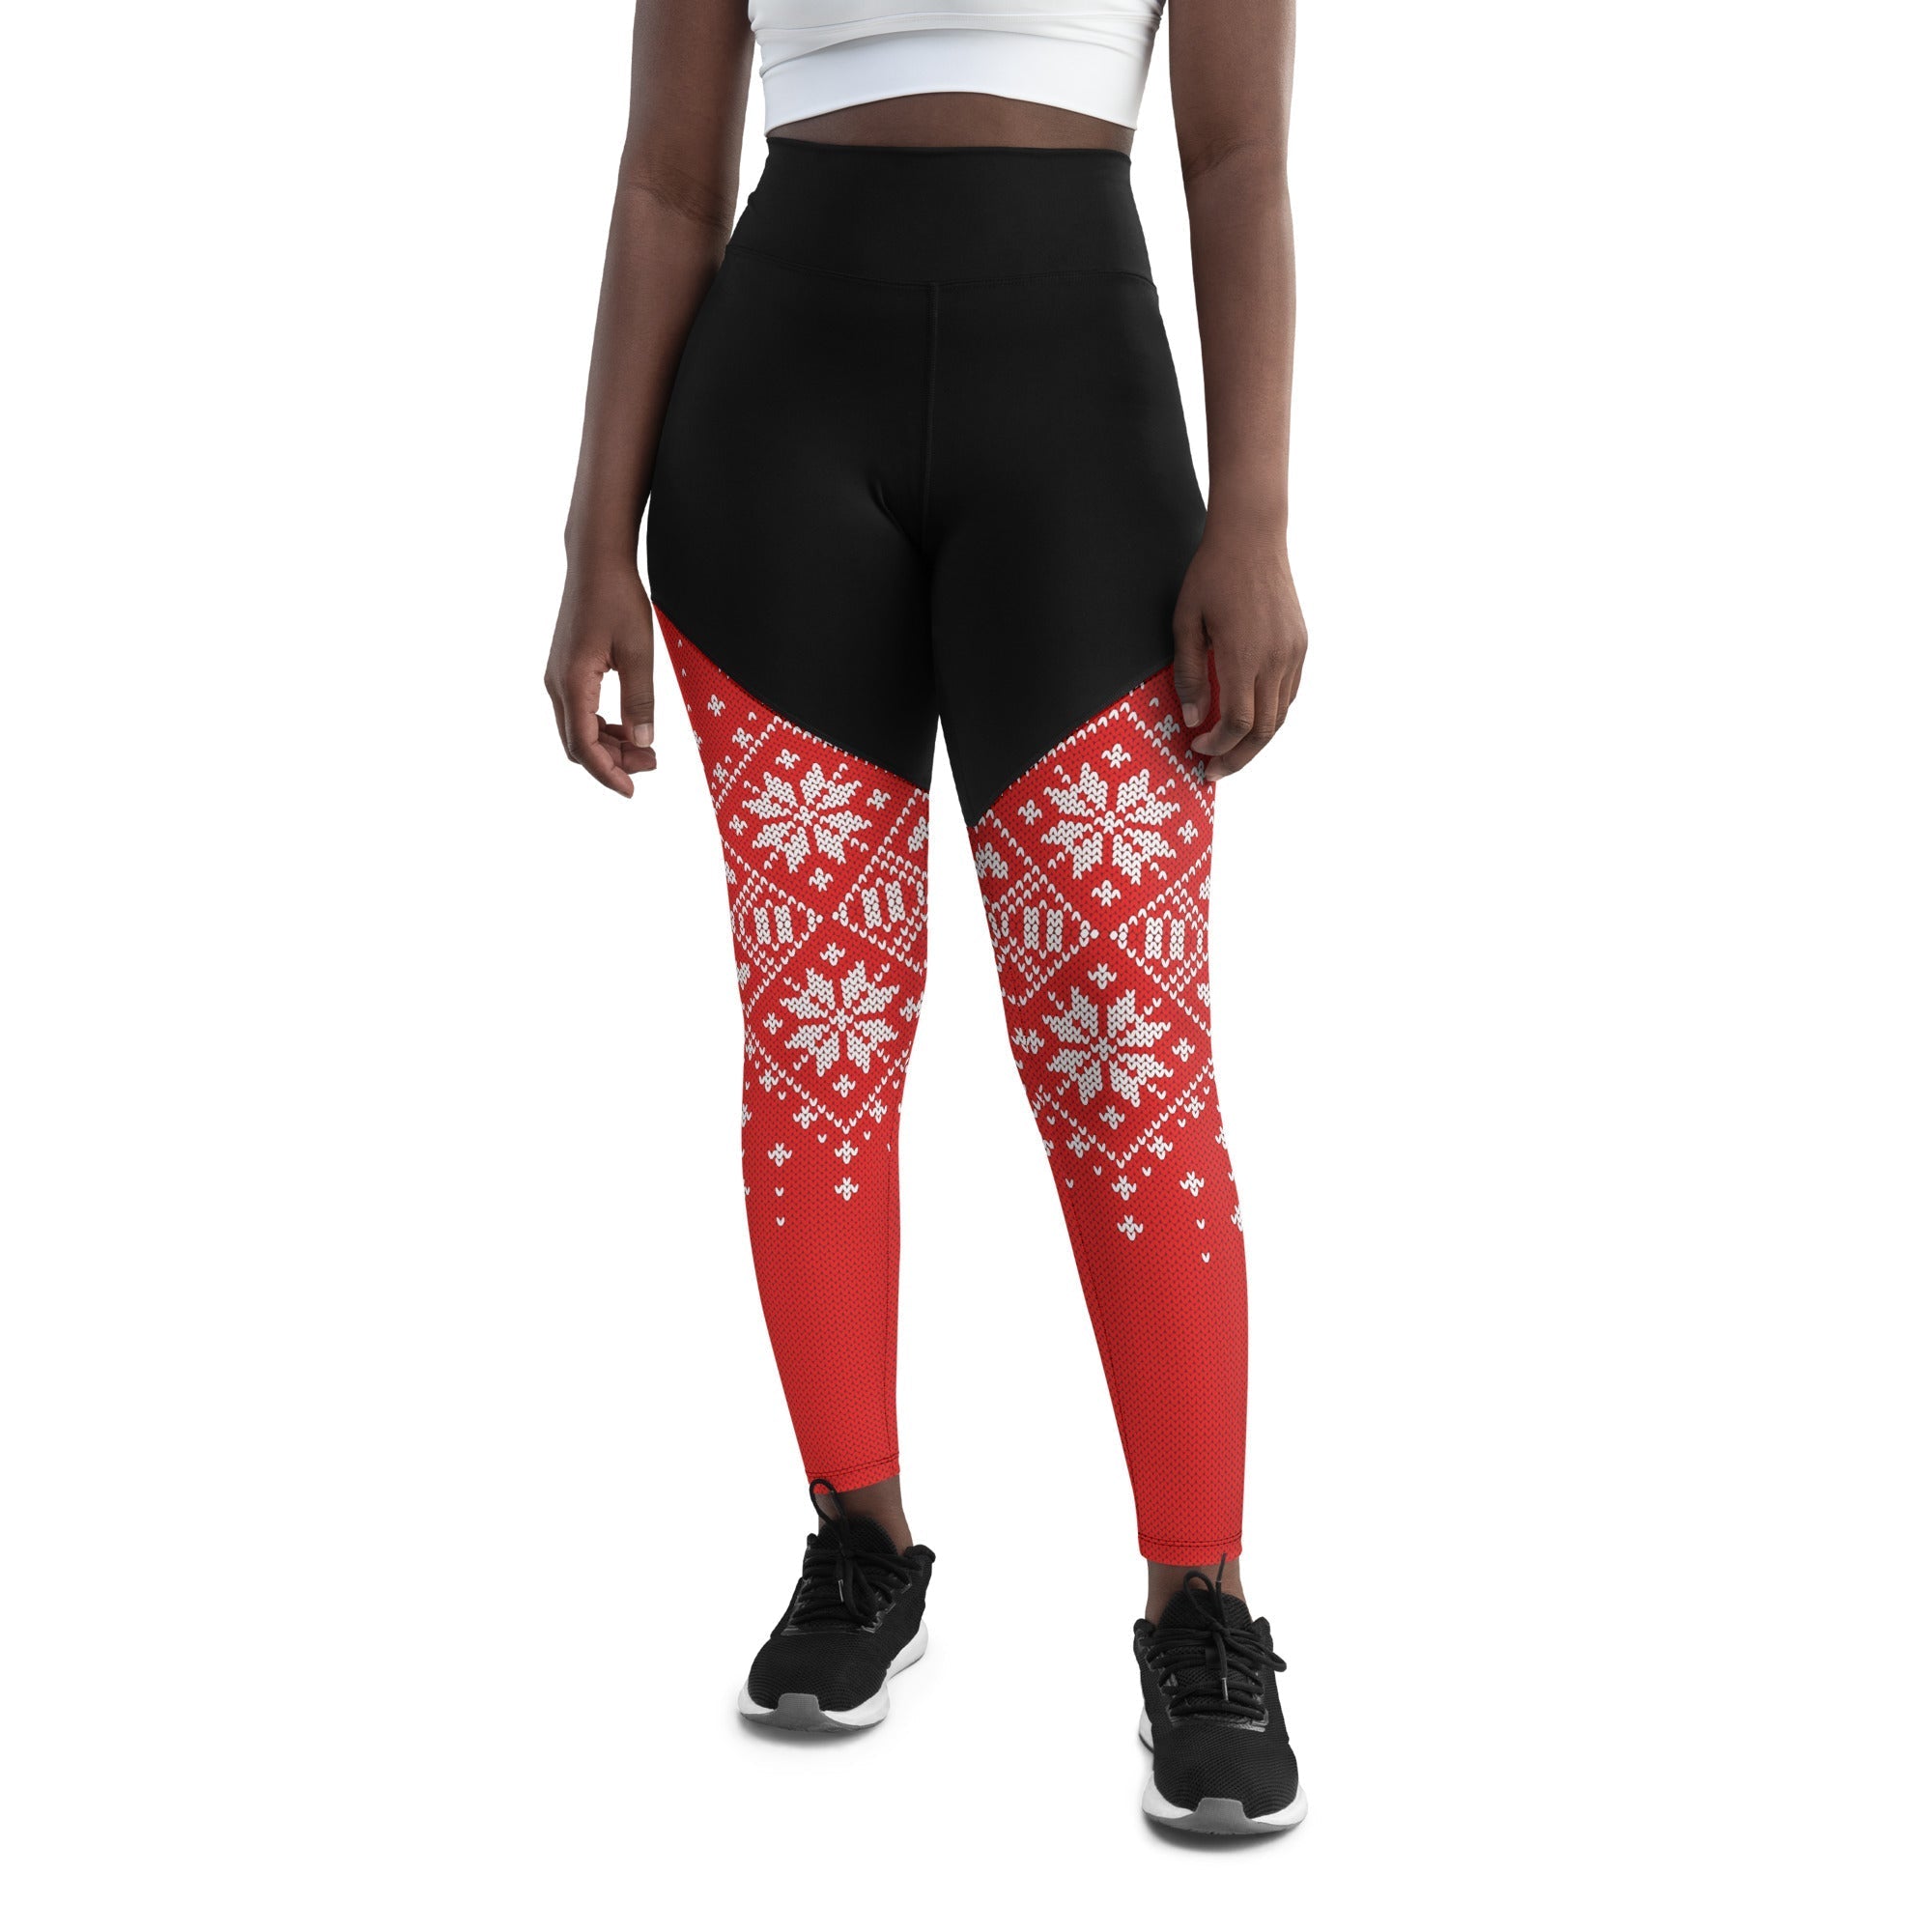 Red Knitted Print Christmas Compression Leggings